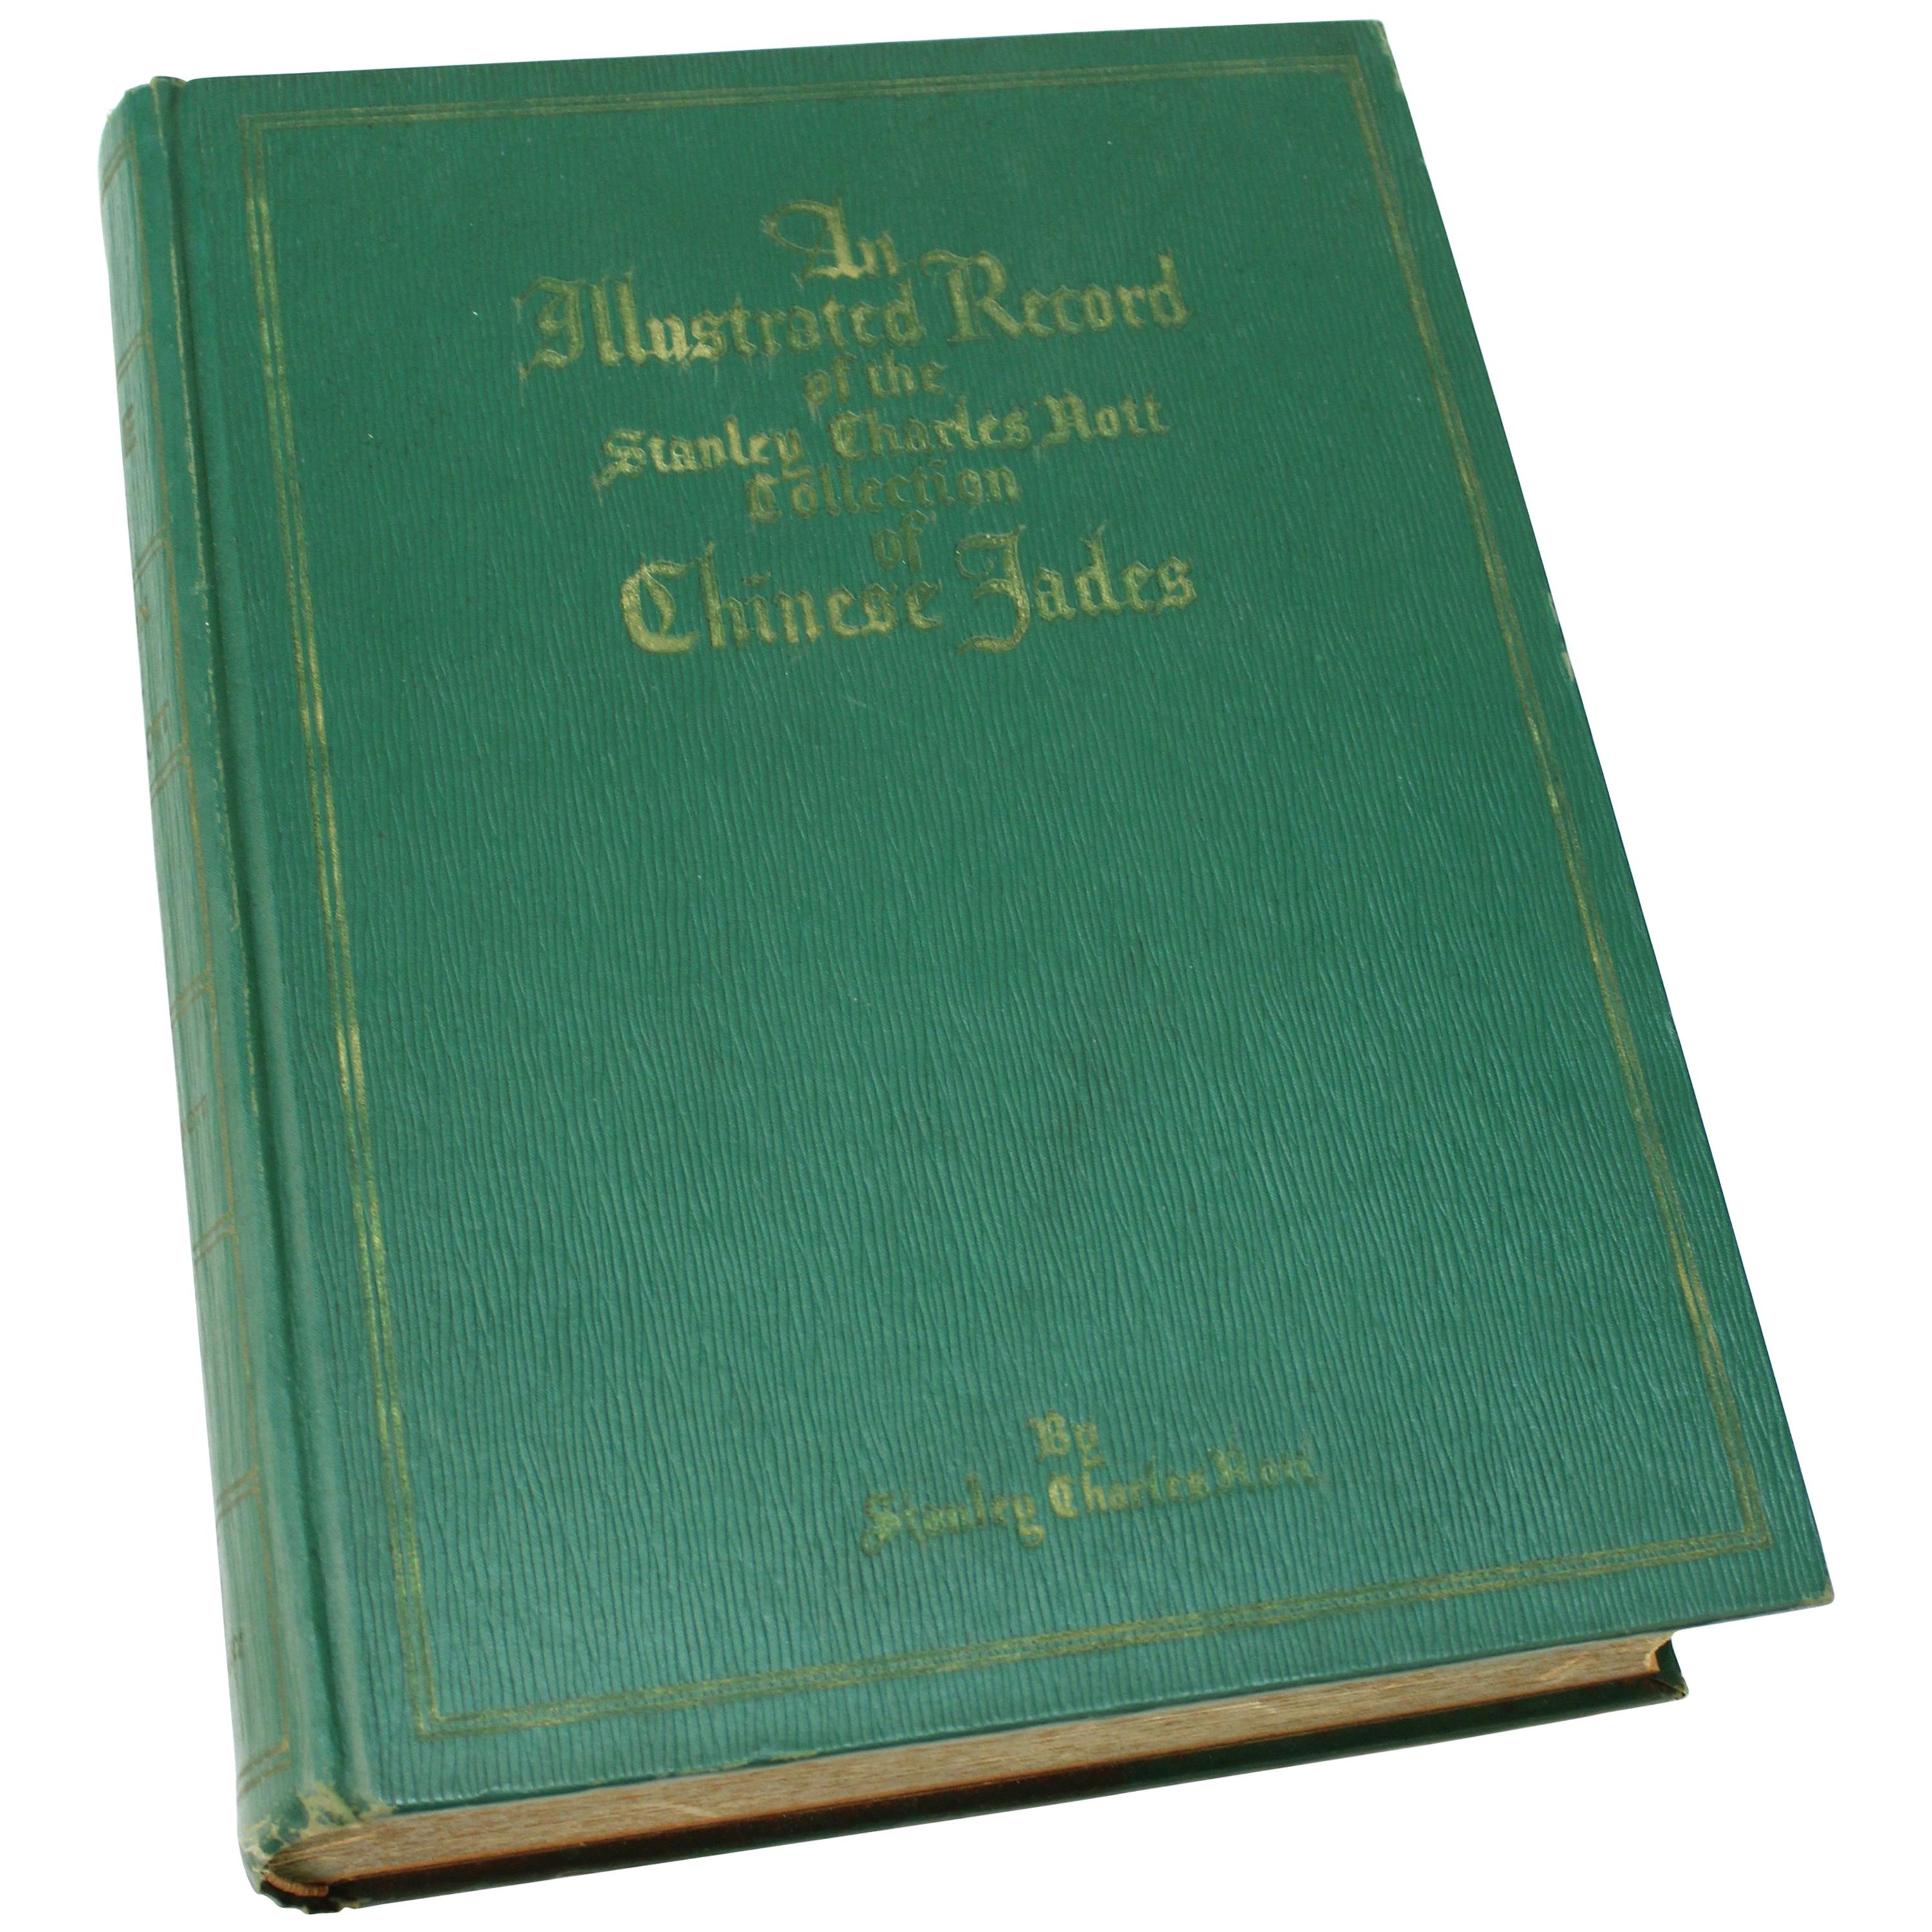 Illustrated Book of The Stanley Charles Nott Collection of Chinese Jades